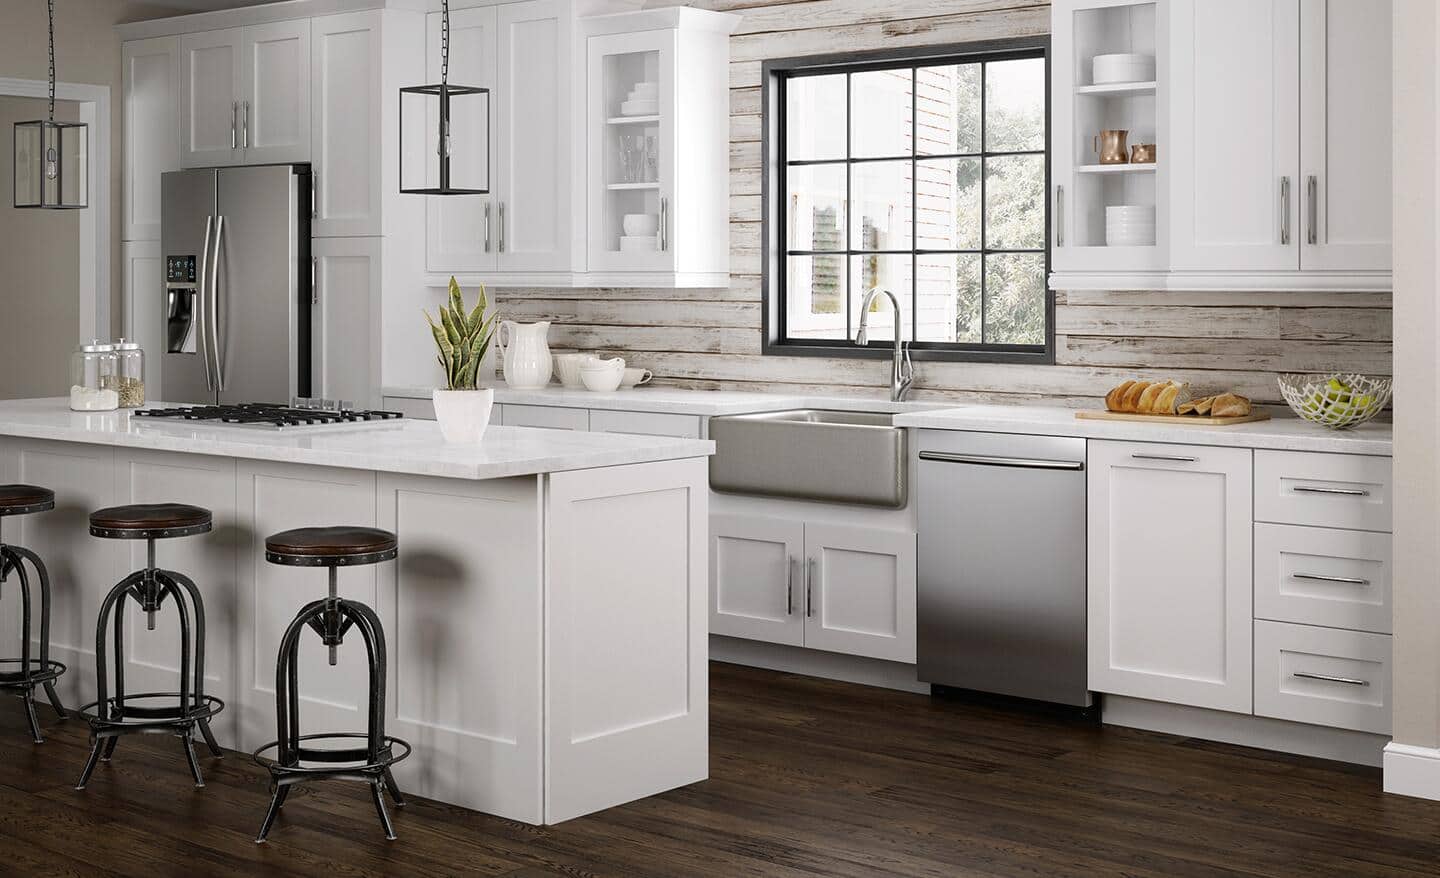 A kitchen featuring white plywood shaker cabinets.